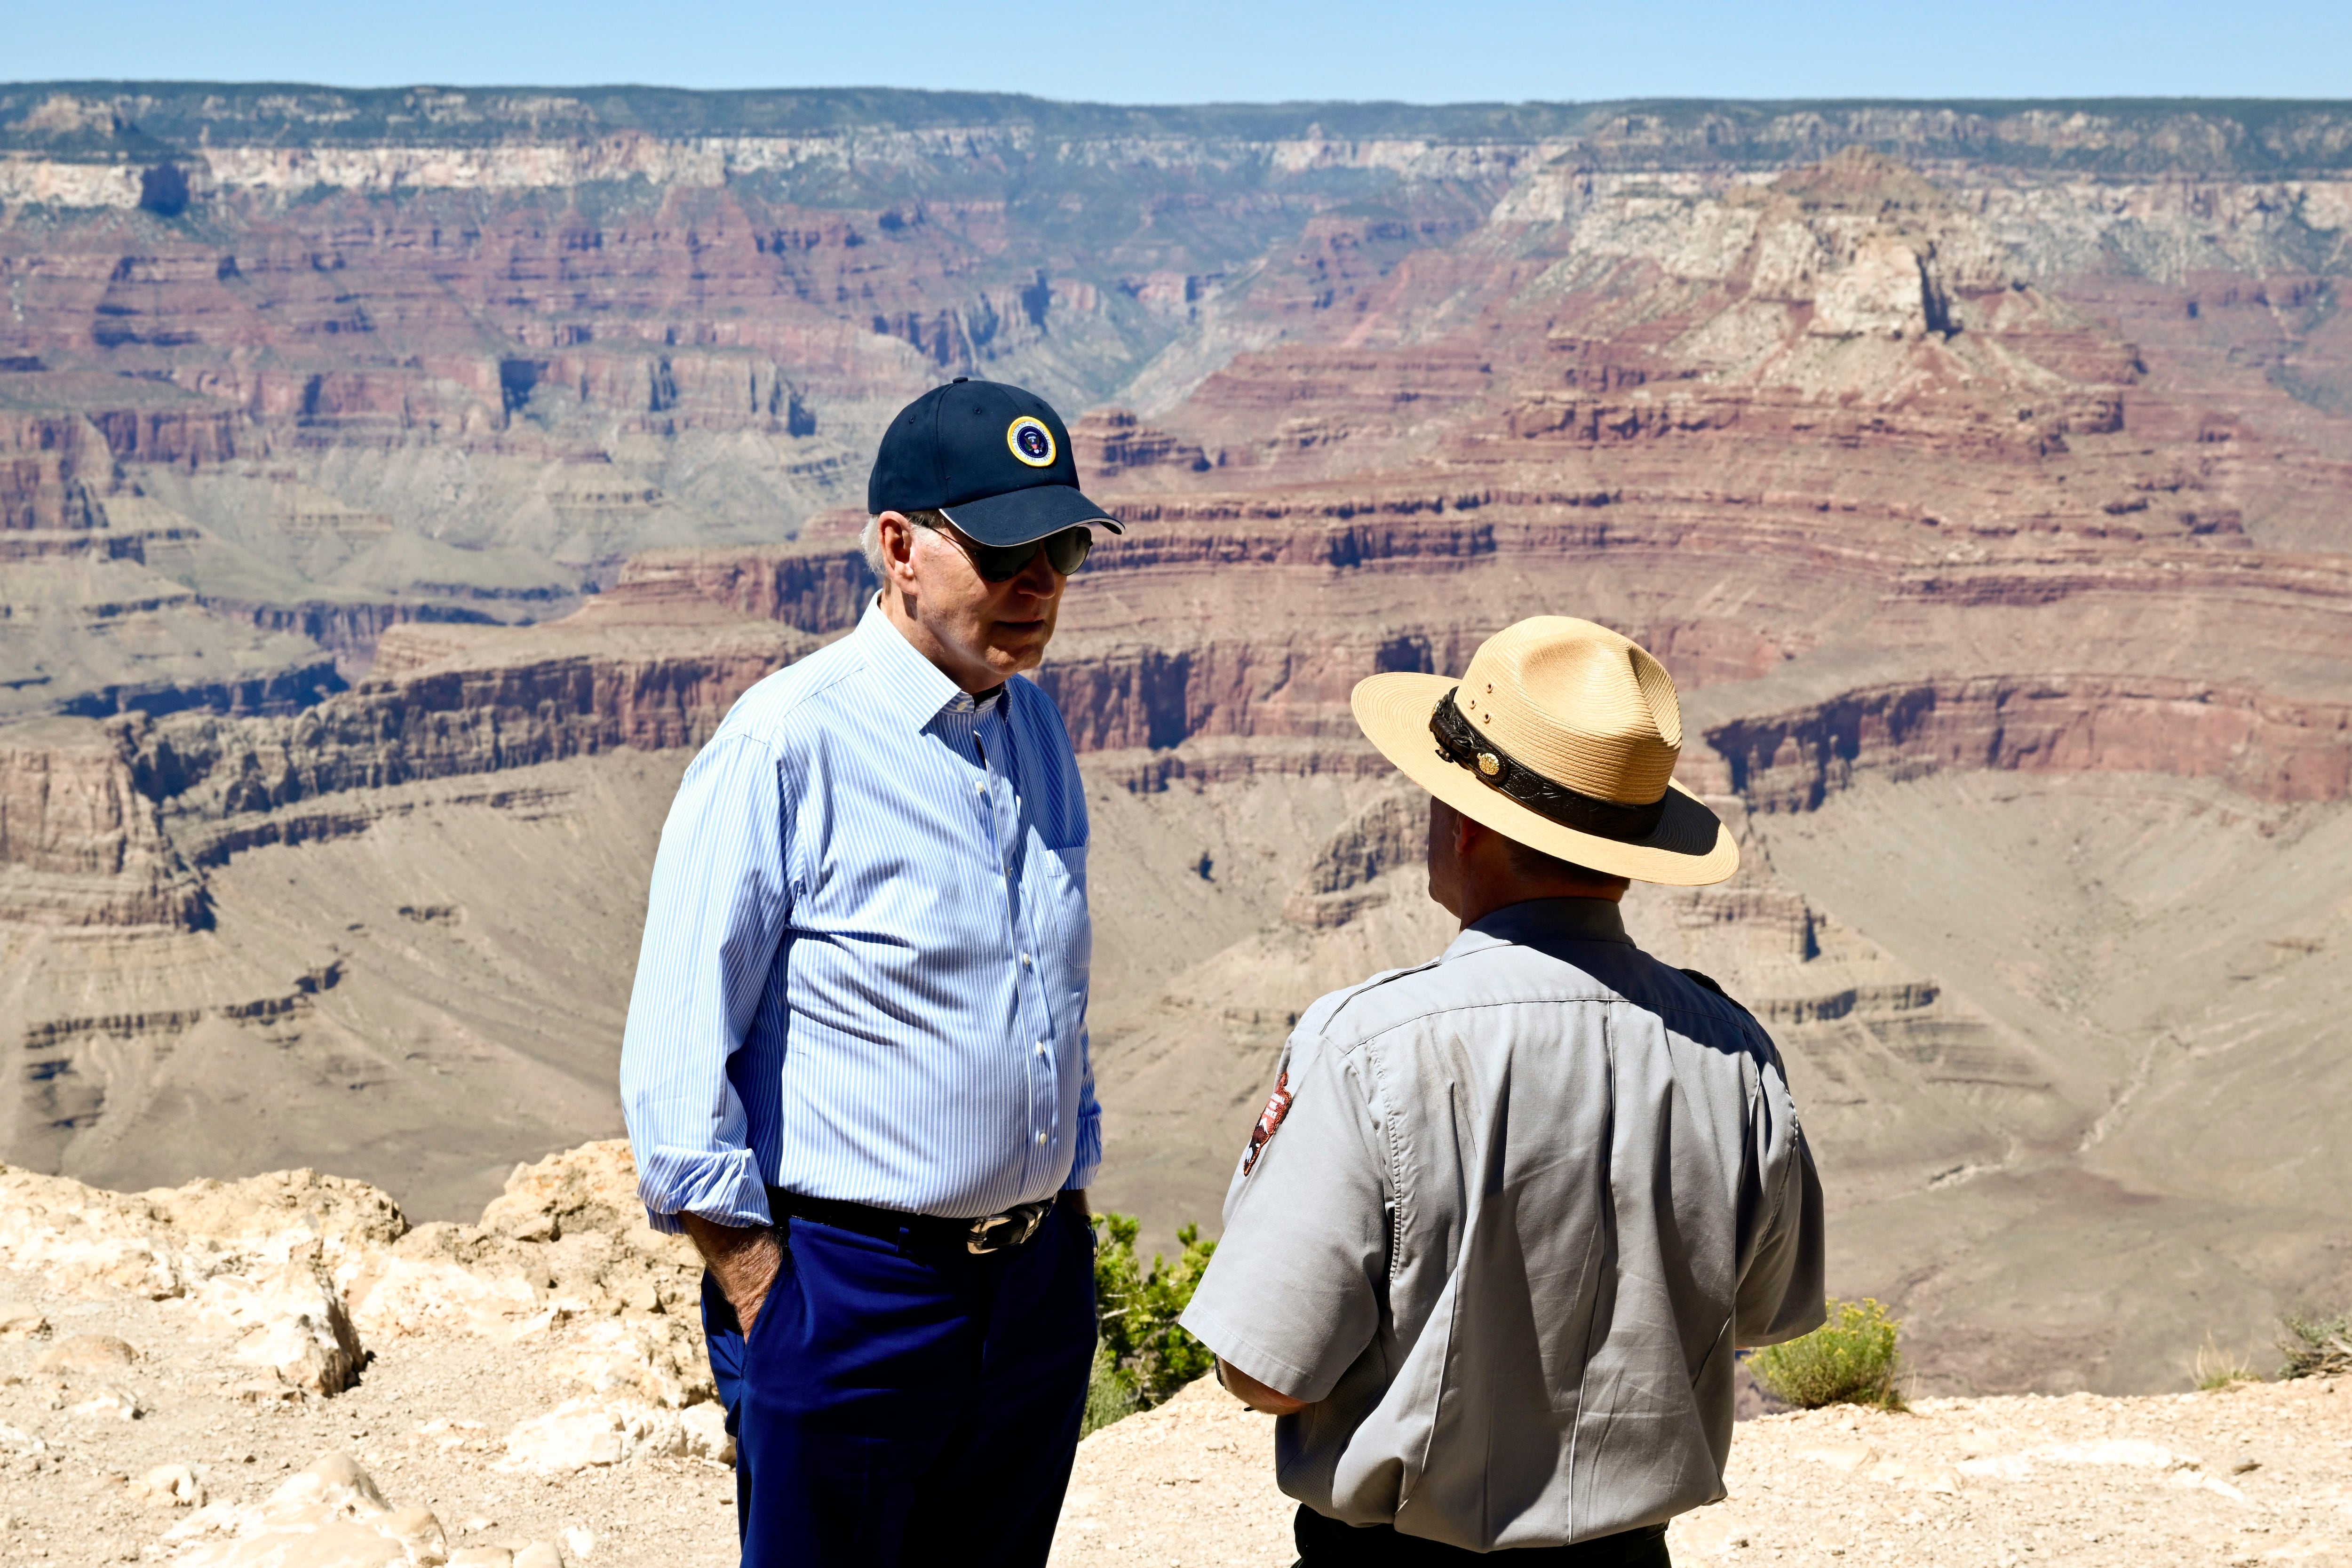 (Kenny Holston | The New York Times) President Joe Biden speaks to Ed Keable, superintendent of Grand Canyon National Park, while looking over the Grand Canyon in August 2023. Some Latter-day Saint women are abandoning their lifelong GOP ties to support the Democratic president against Republican Donald Trump in 2024.